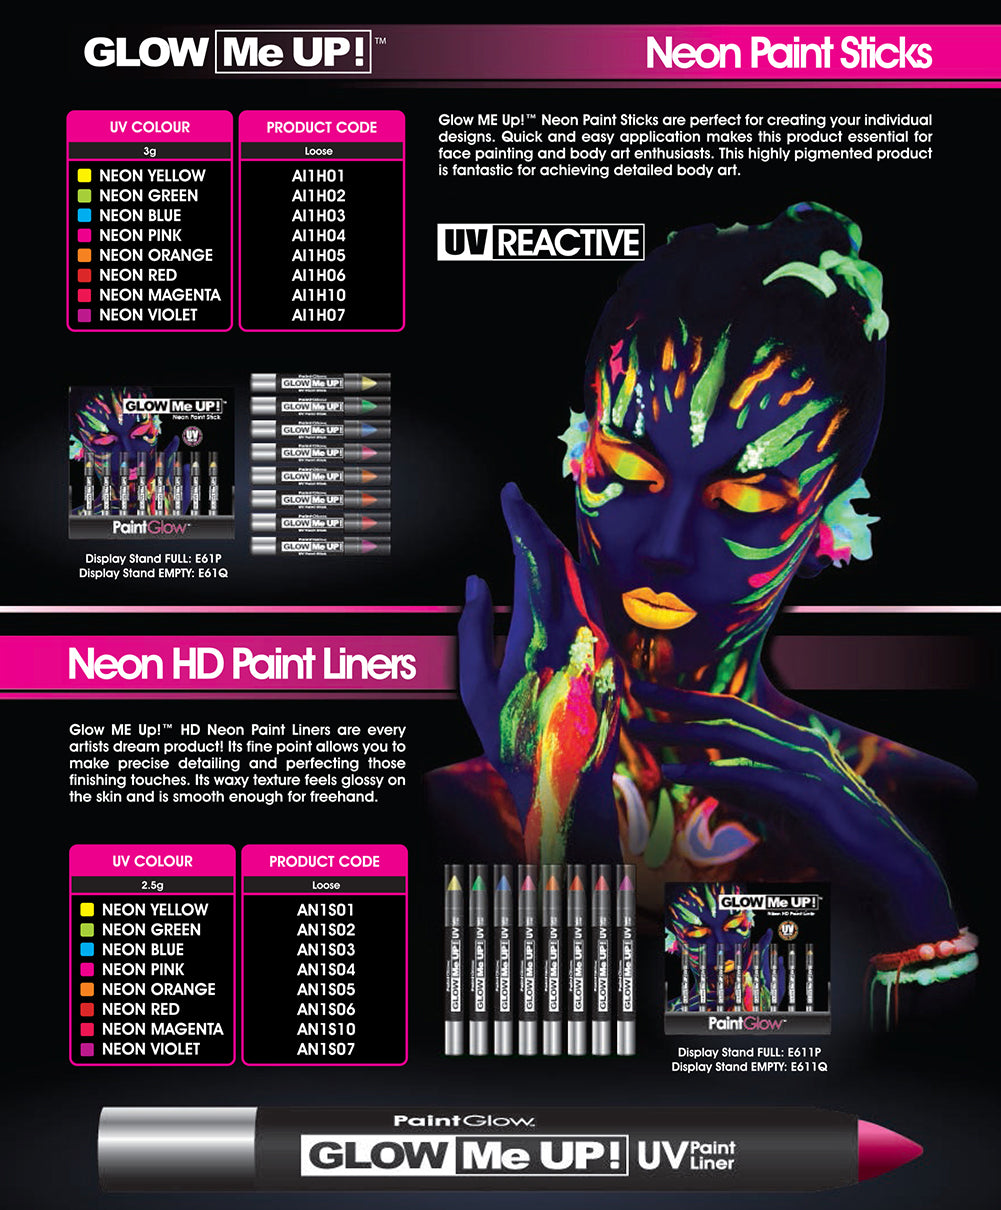 individuall Neon Nights UV Glow in The Dark Body Paint - 8 Pck Black Light  Paints Party Supplies Kit for Adults & Kids Professional Bodypainting and  Face Makeup UV Body Paint